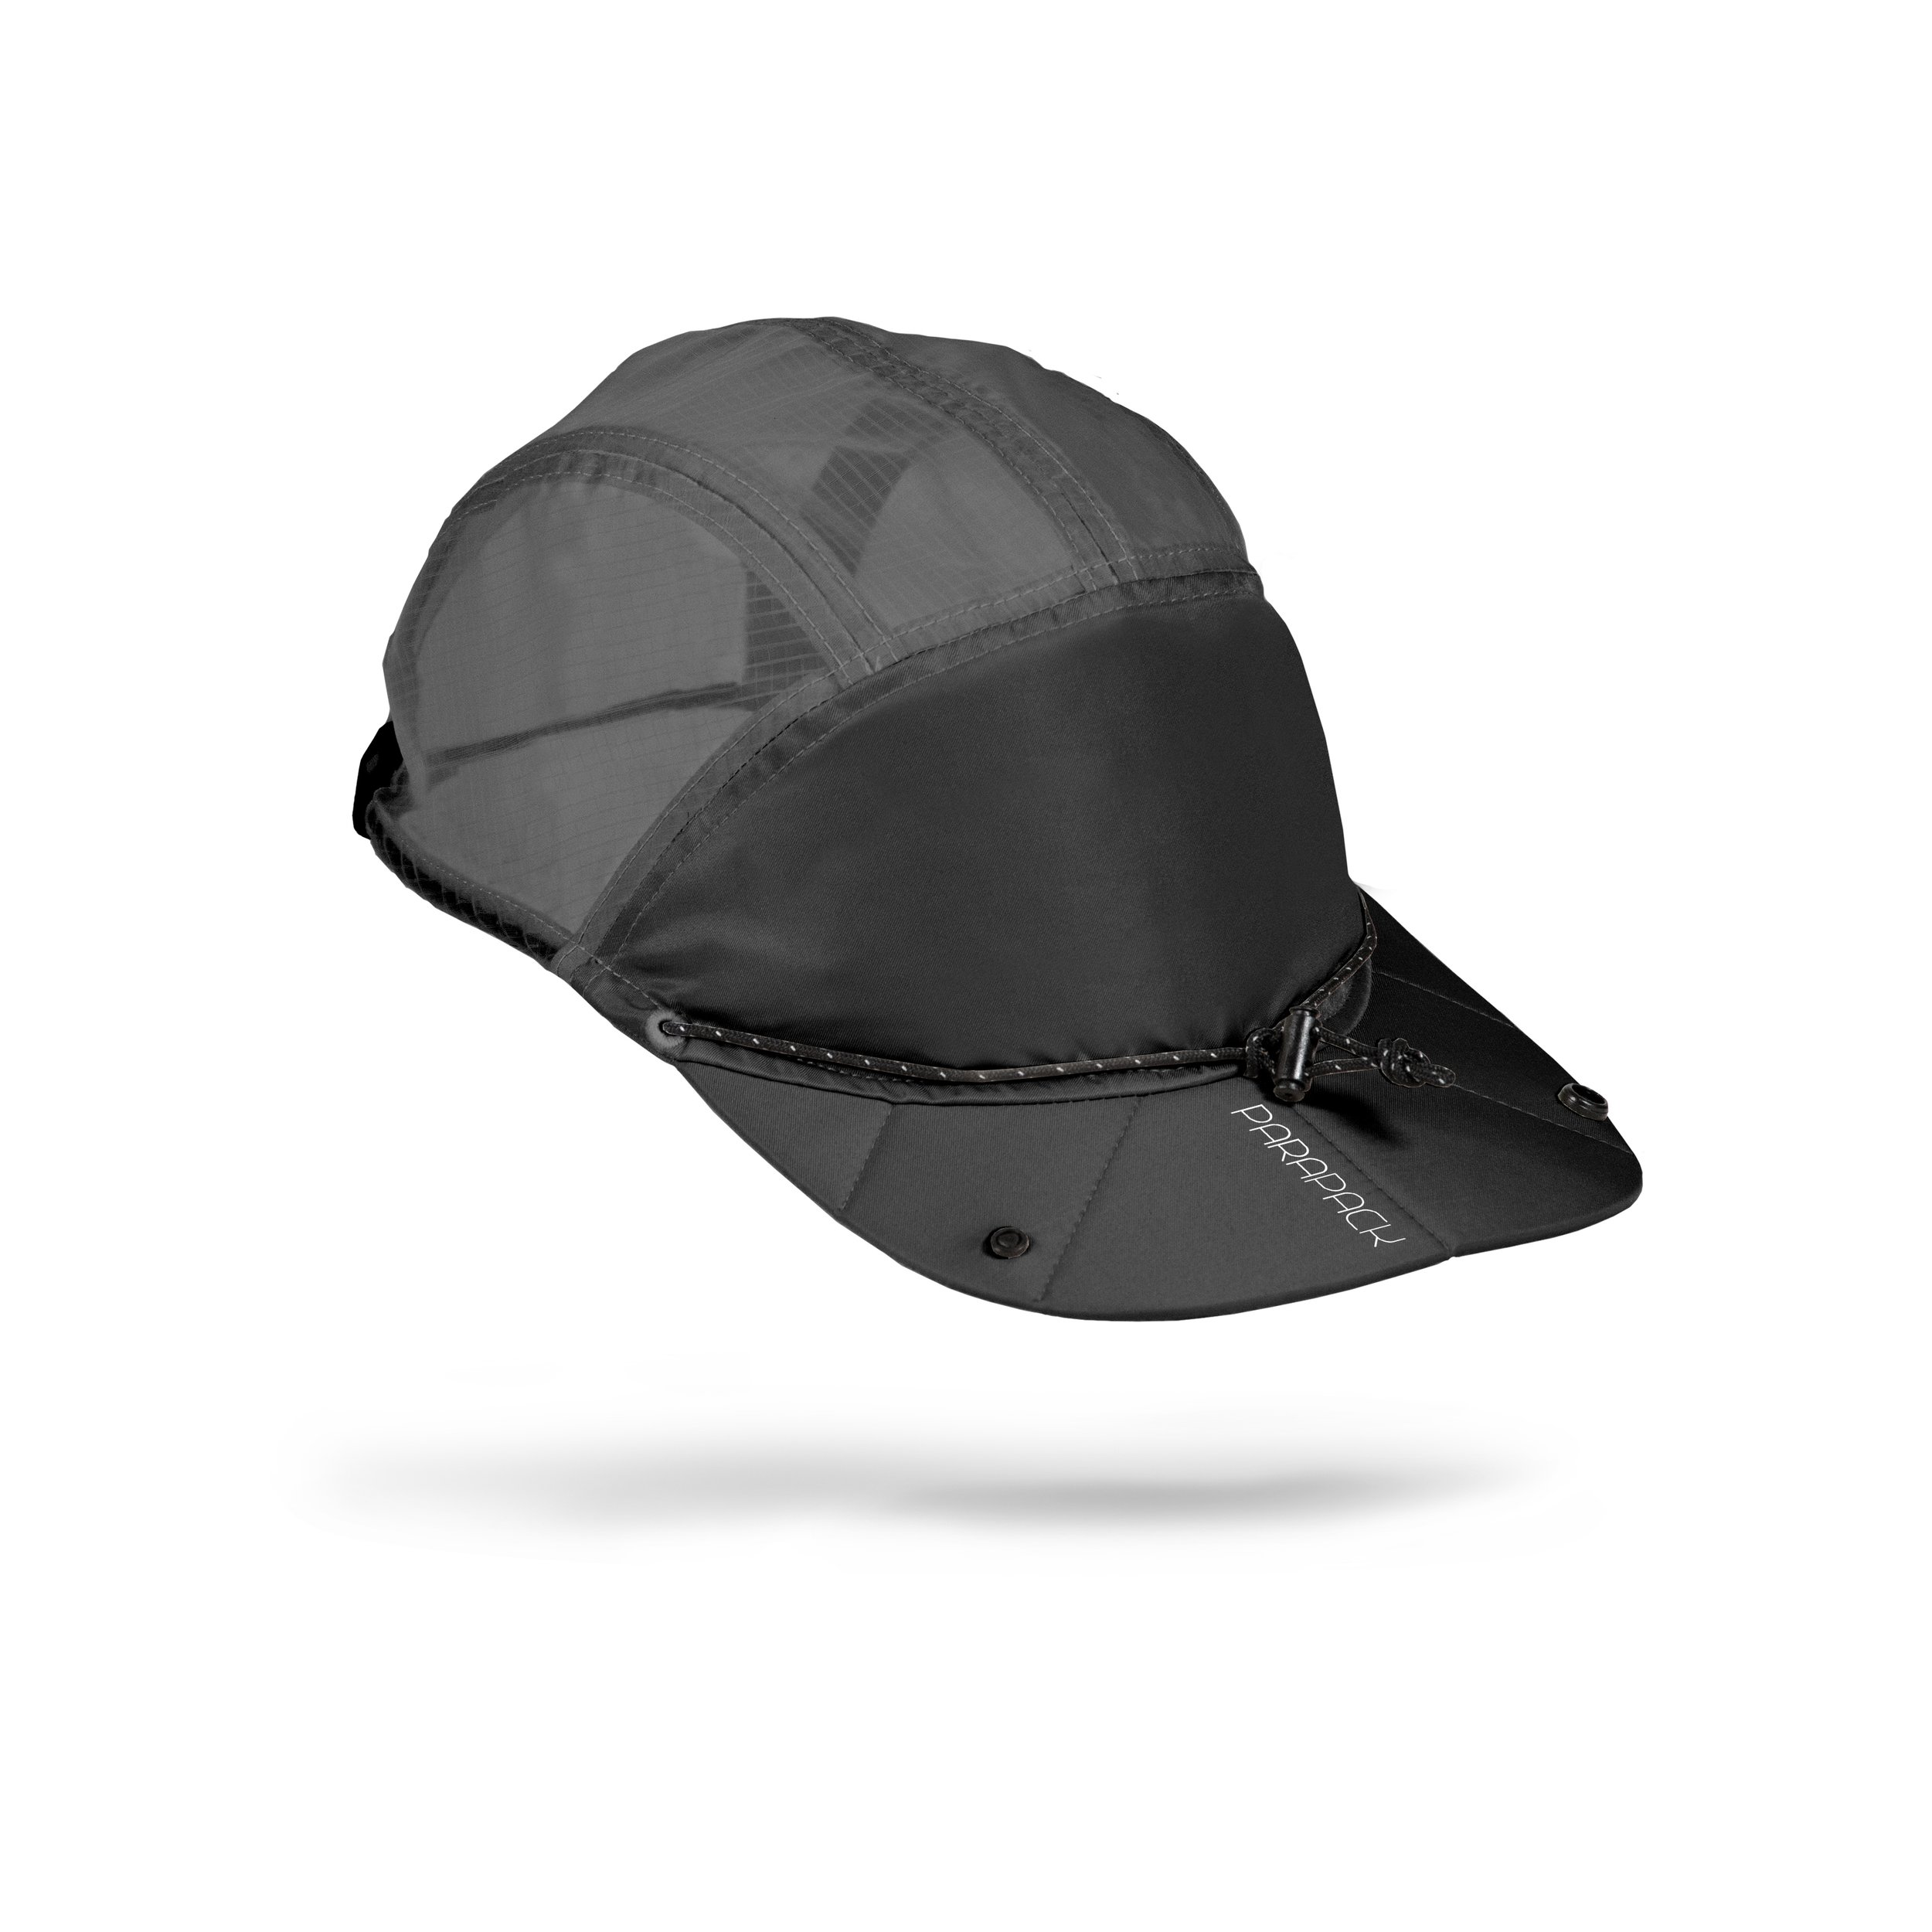 Parapack P-Cap | Jet Black | Ultra-lightweight packable headwear for all  head sizes! — PARAPACK